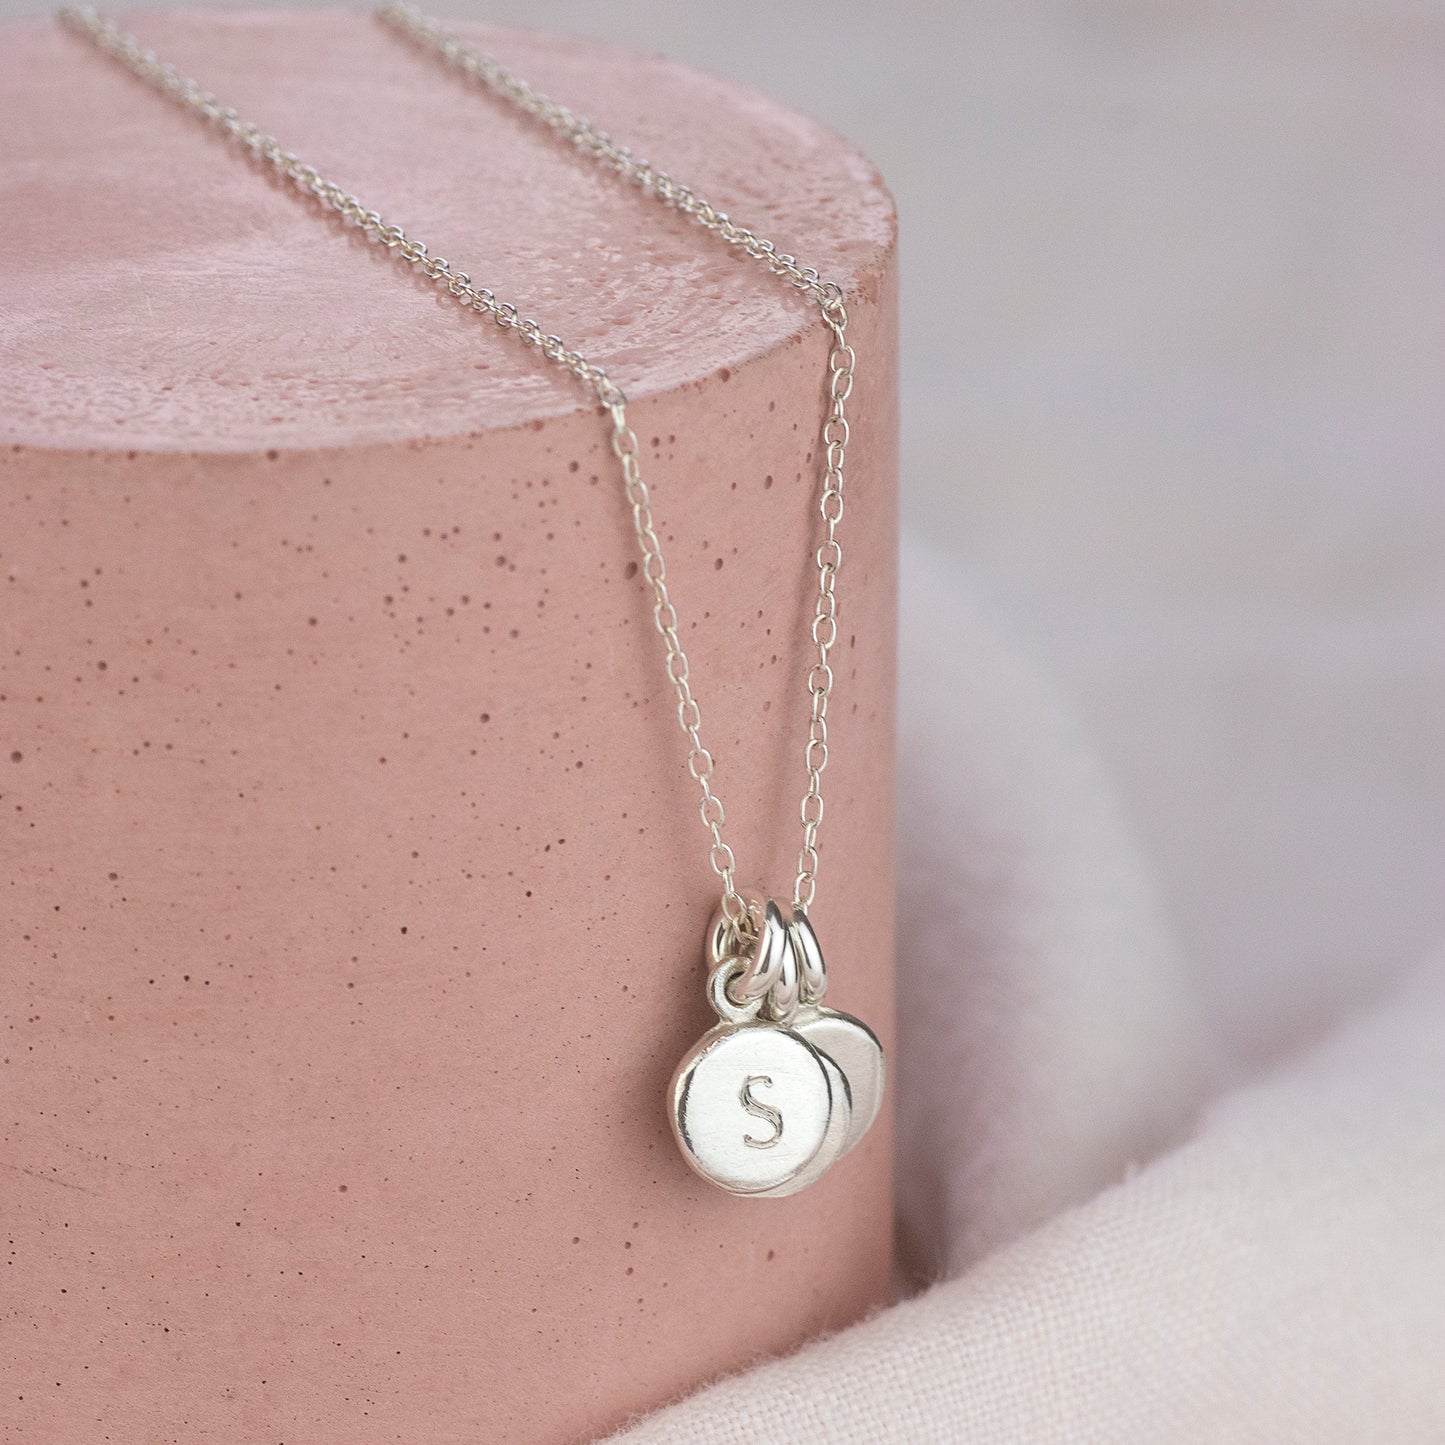 Personalised Family Initials Necklace